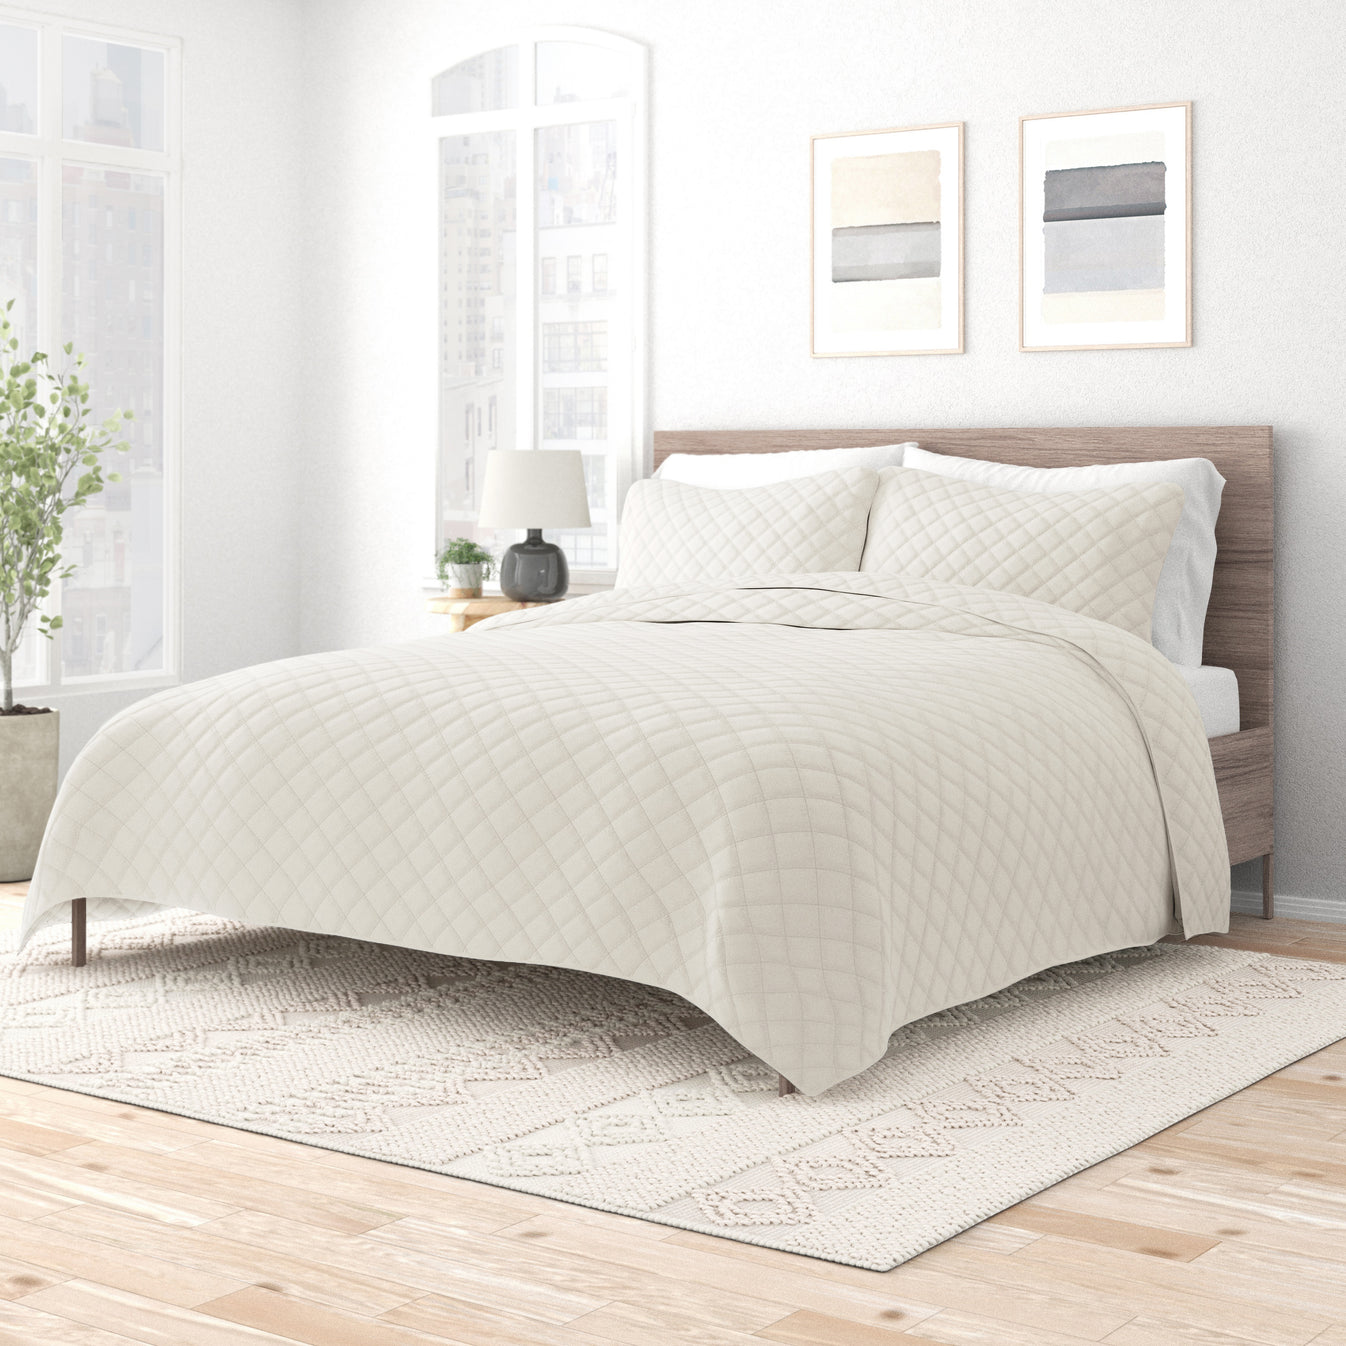 3 Piece Diamond Stitch Quilted Coverlet Set